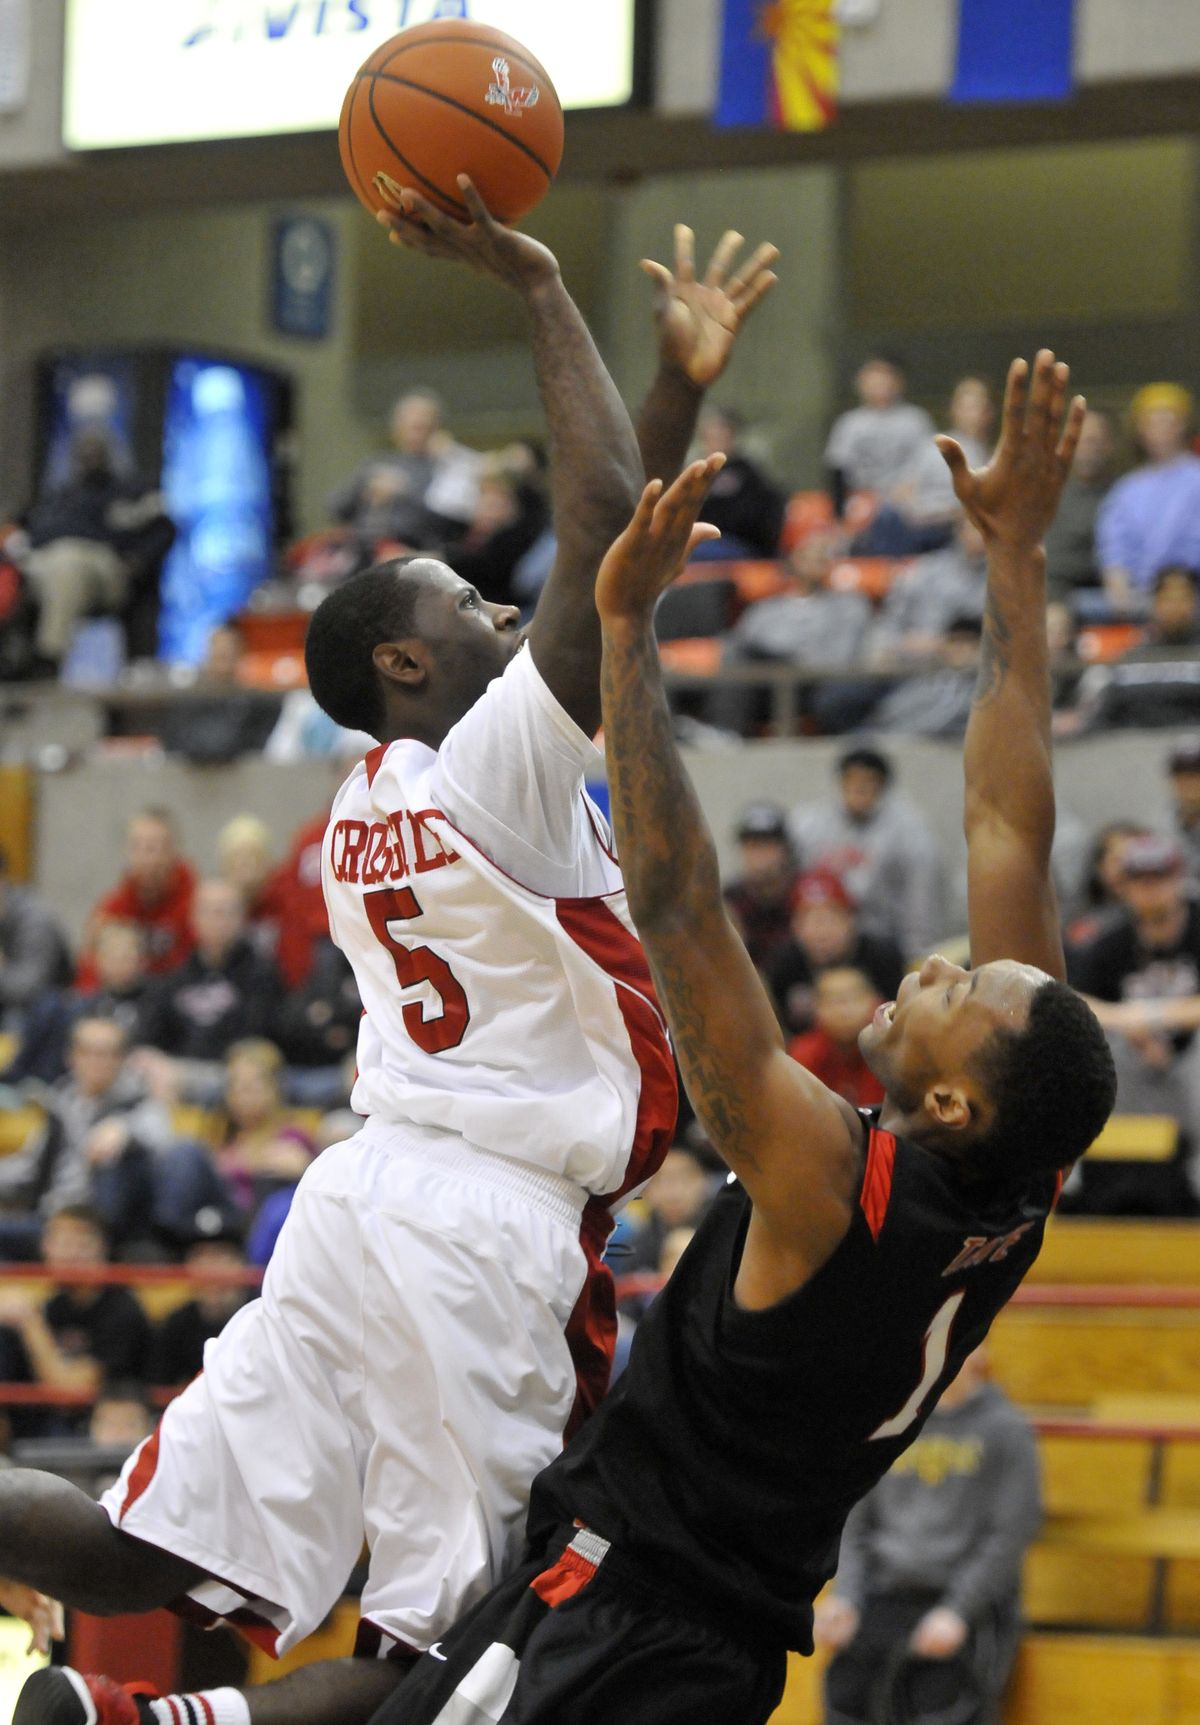 Eastern’s Justin Crosgile, driving against Seattle’s Allen Tate, scored a team-high 15 points in the loss. (Jesse Tinsley)